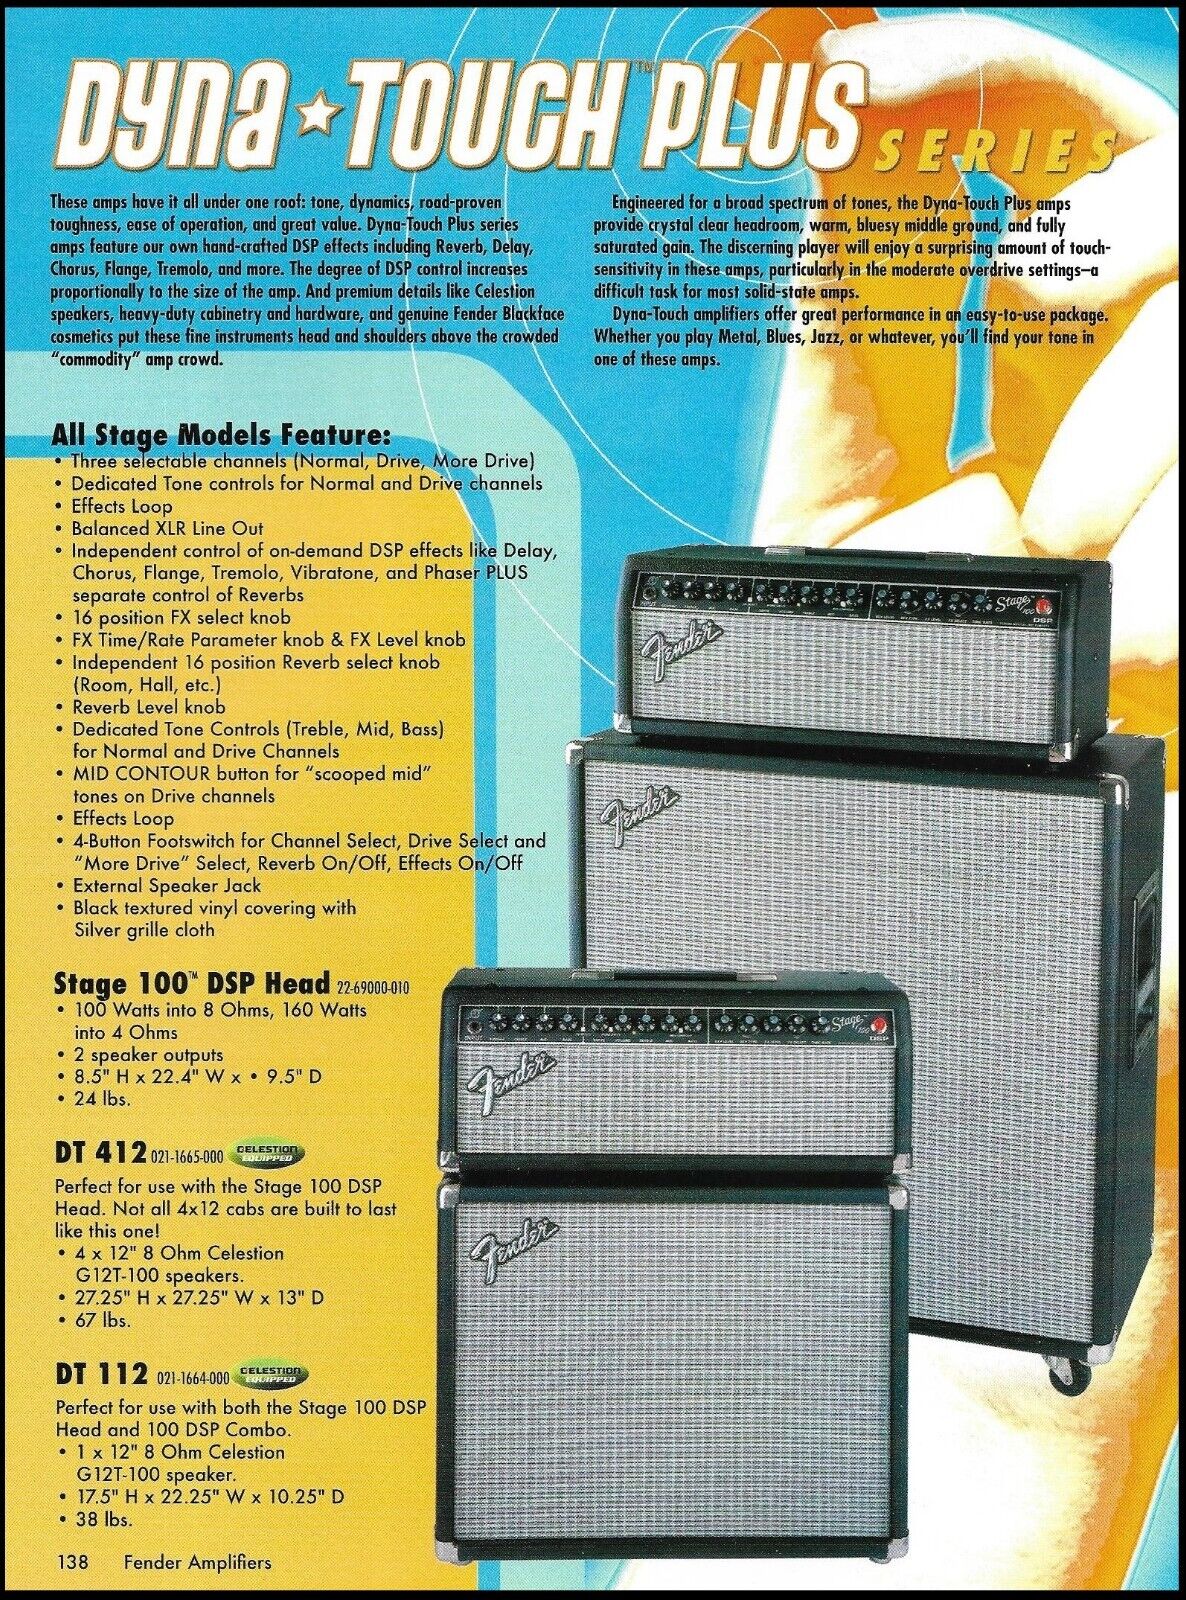 Fender Dyna-Touch Plus Stage 100 DSP Head DT 412 112 amp ad advertisement print